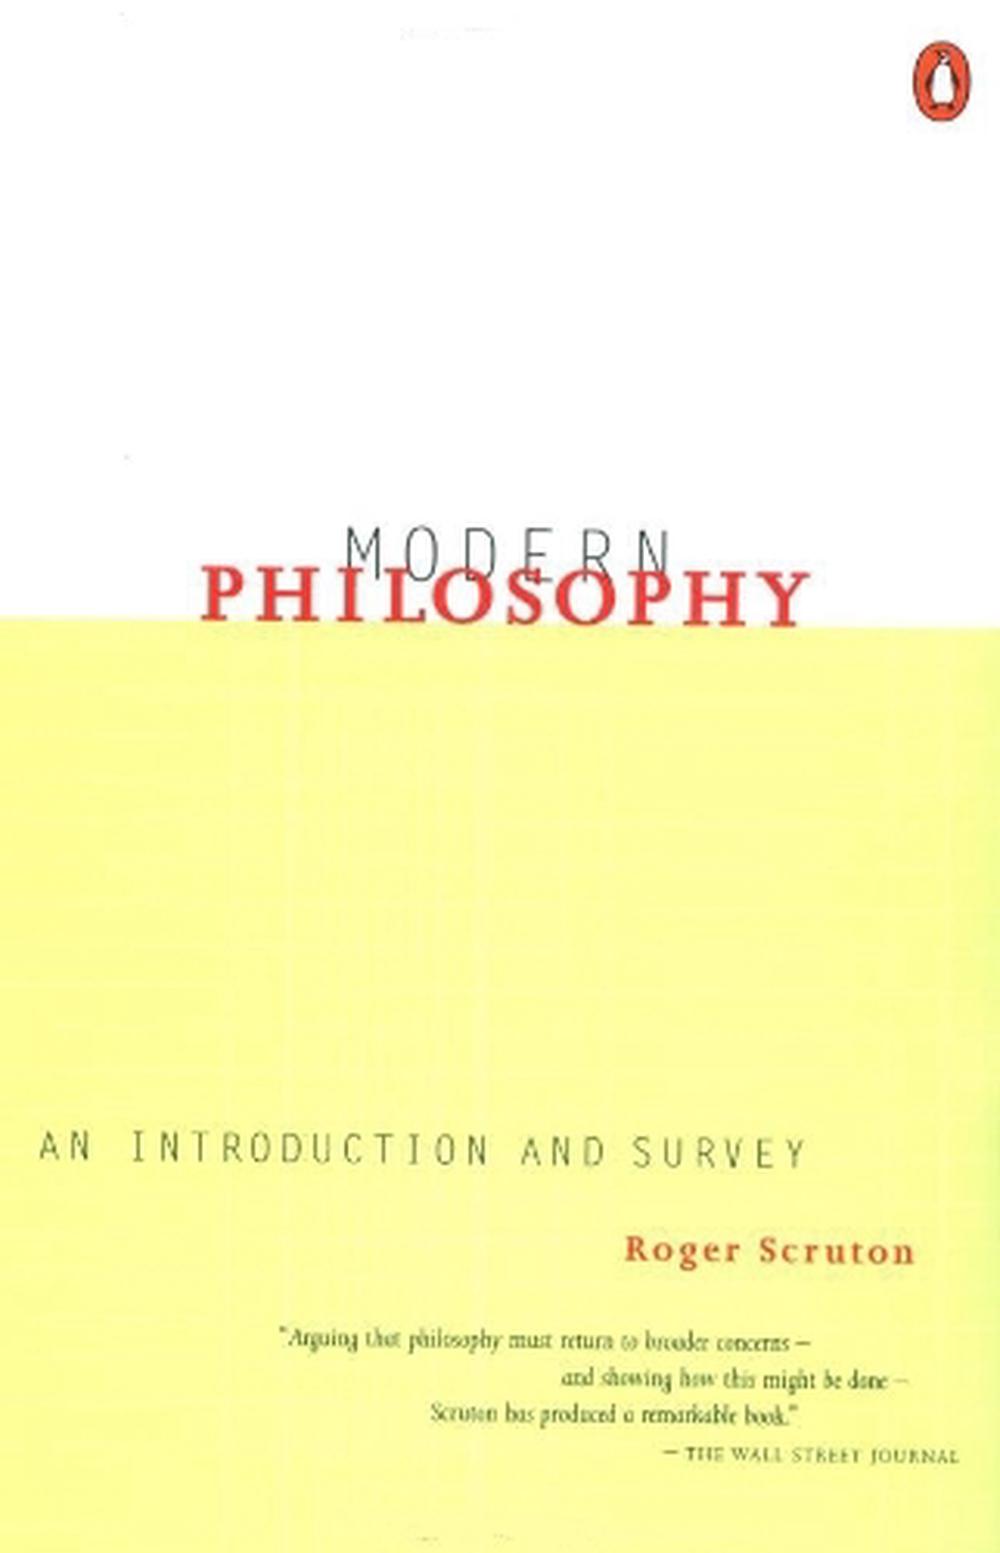 research paper about modern philosophy